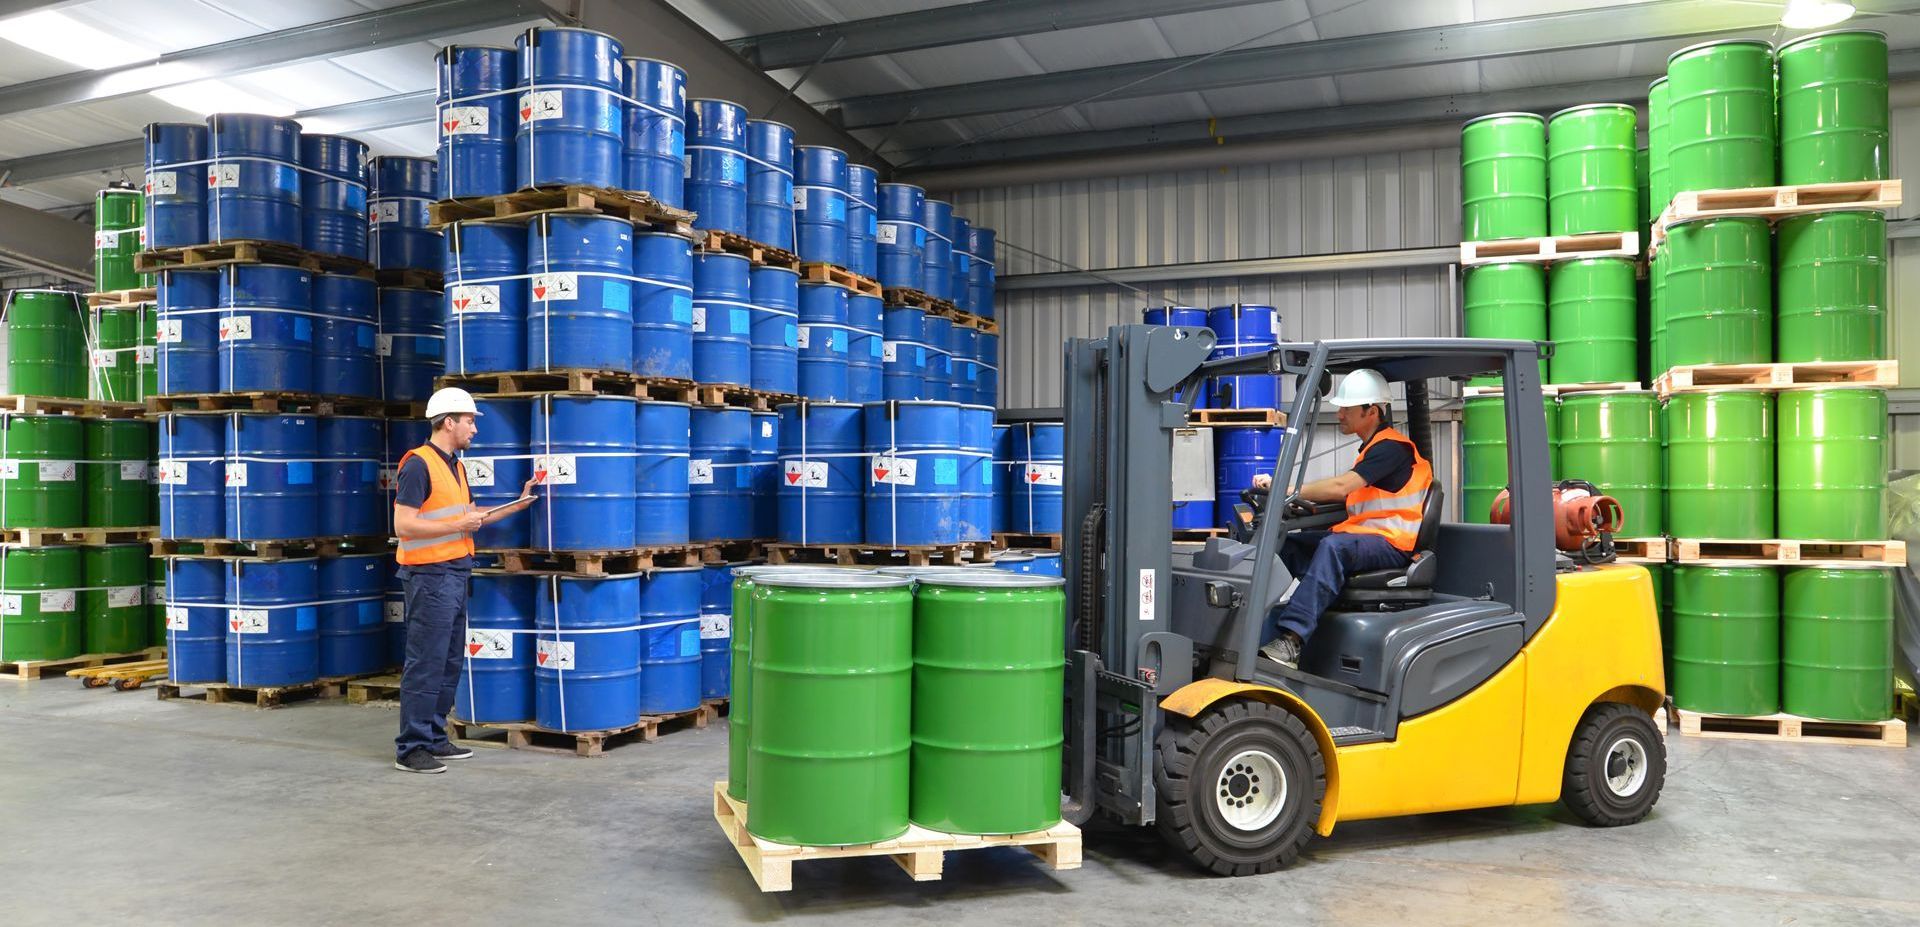 group of workers in the logistics industry work in a warehouse with chemicals | they rely on a specialty chemicals supplier